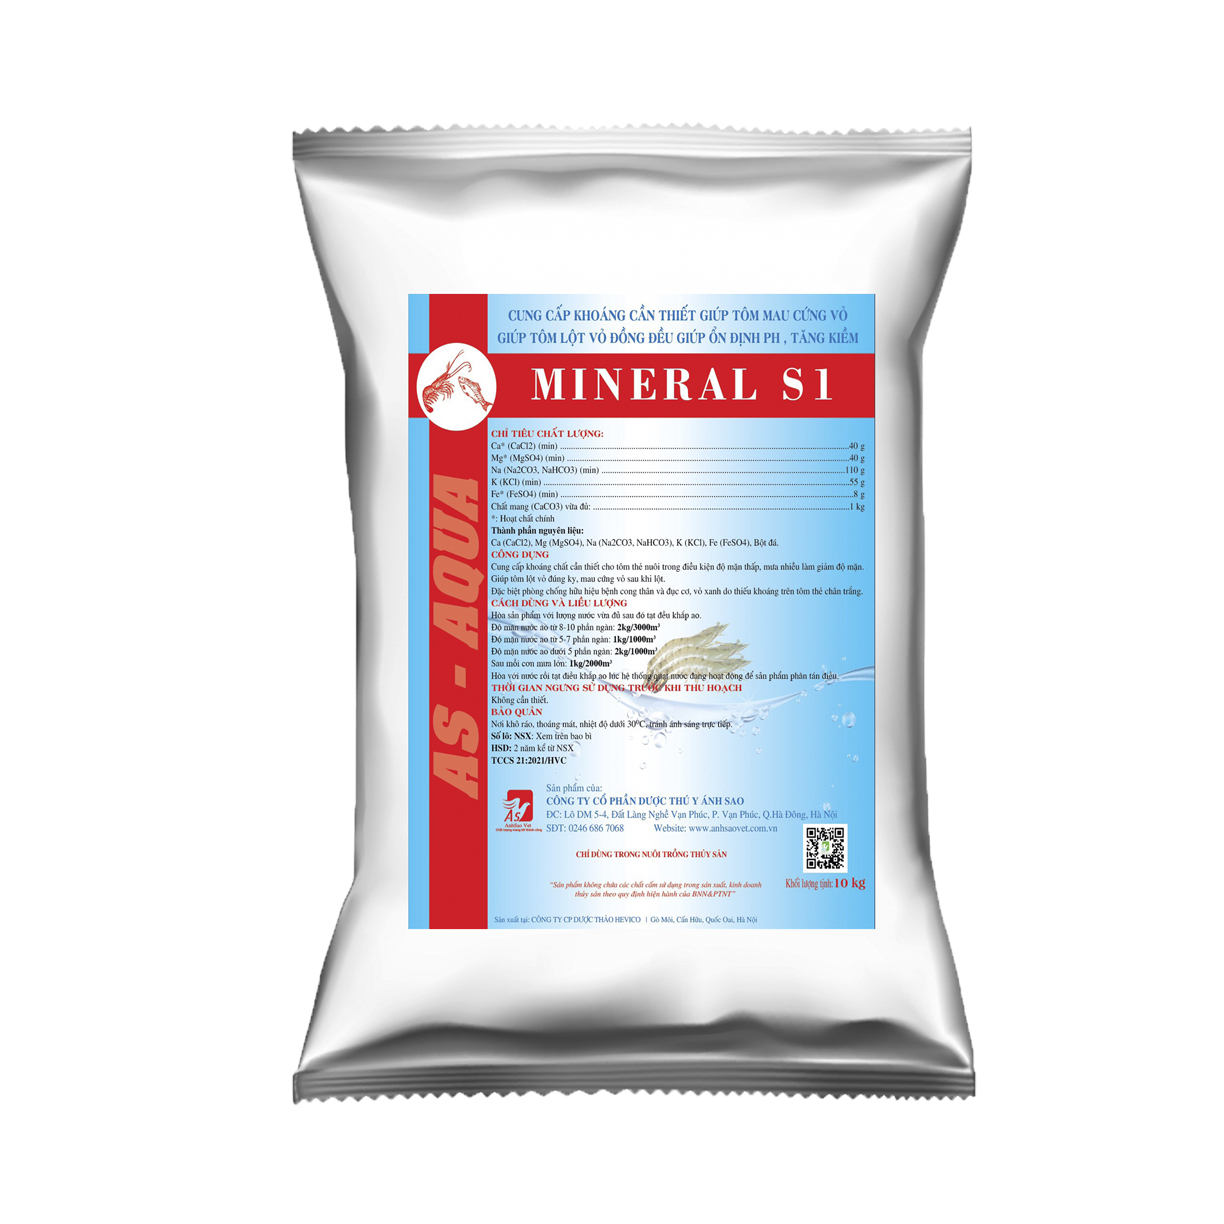 MINERAL S1